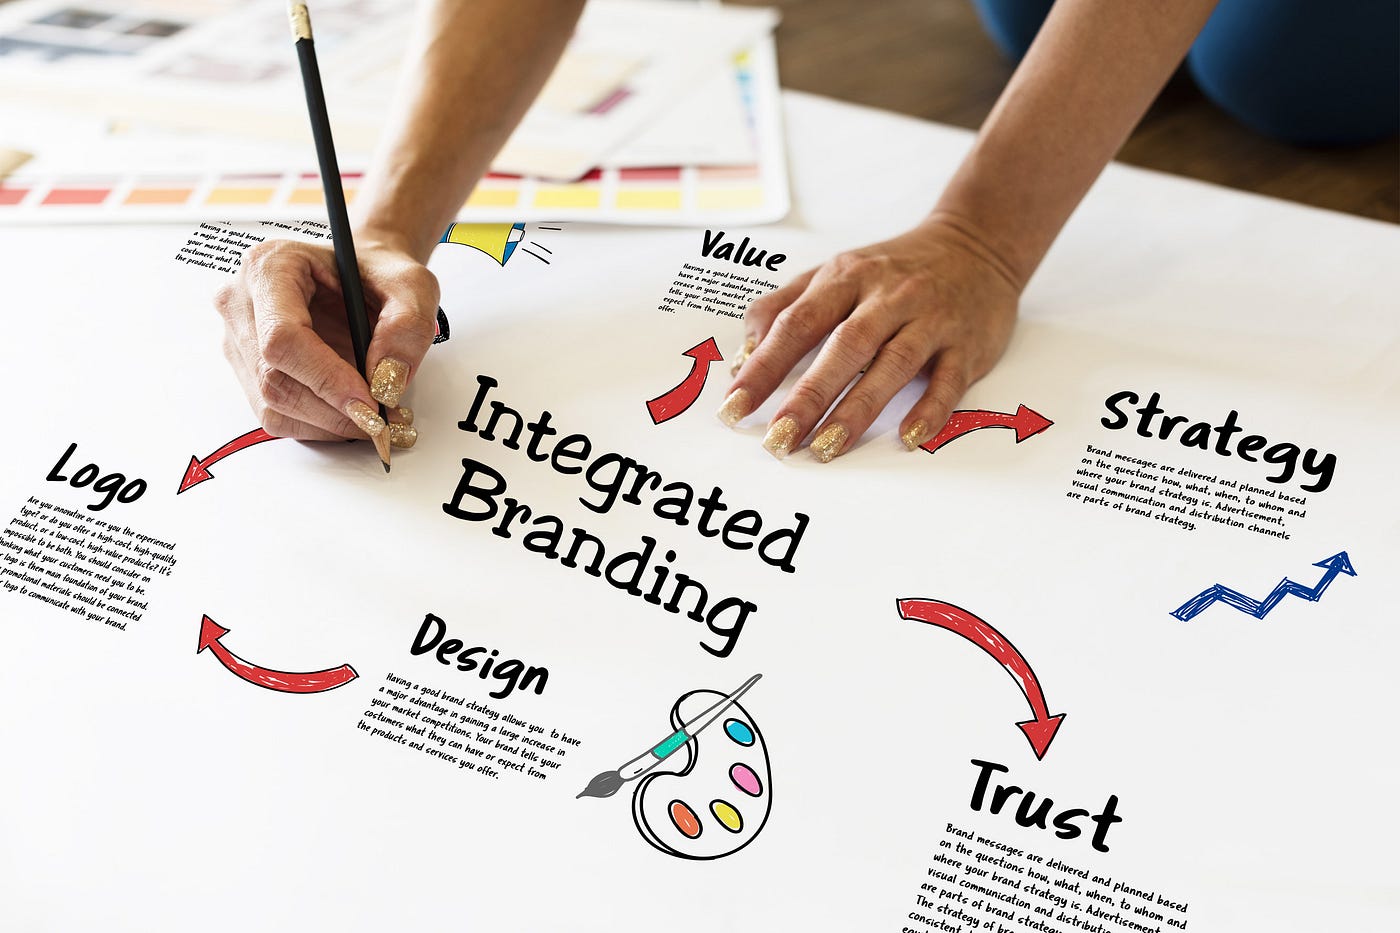 How To Create A Strong Visual Identity: The Foundation Of Your Brand's  Success